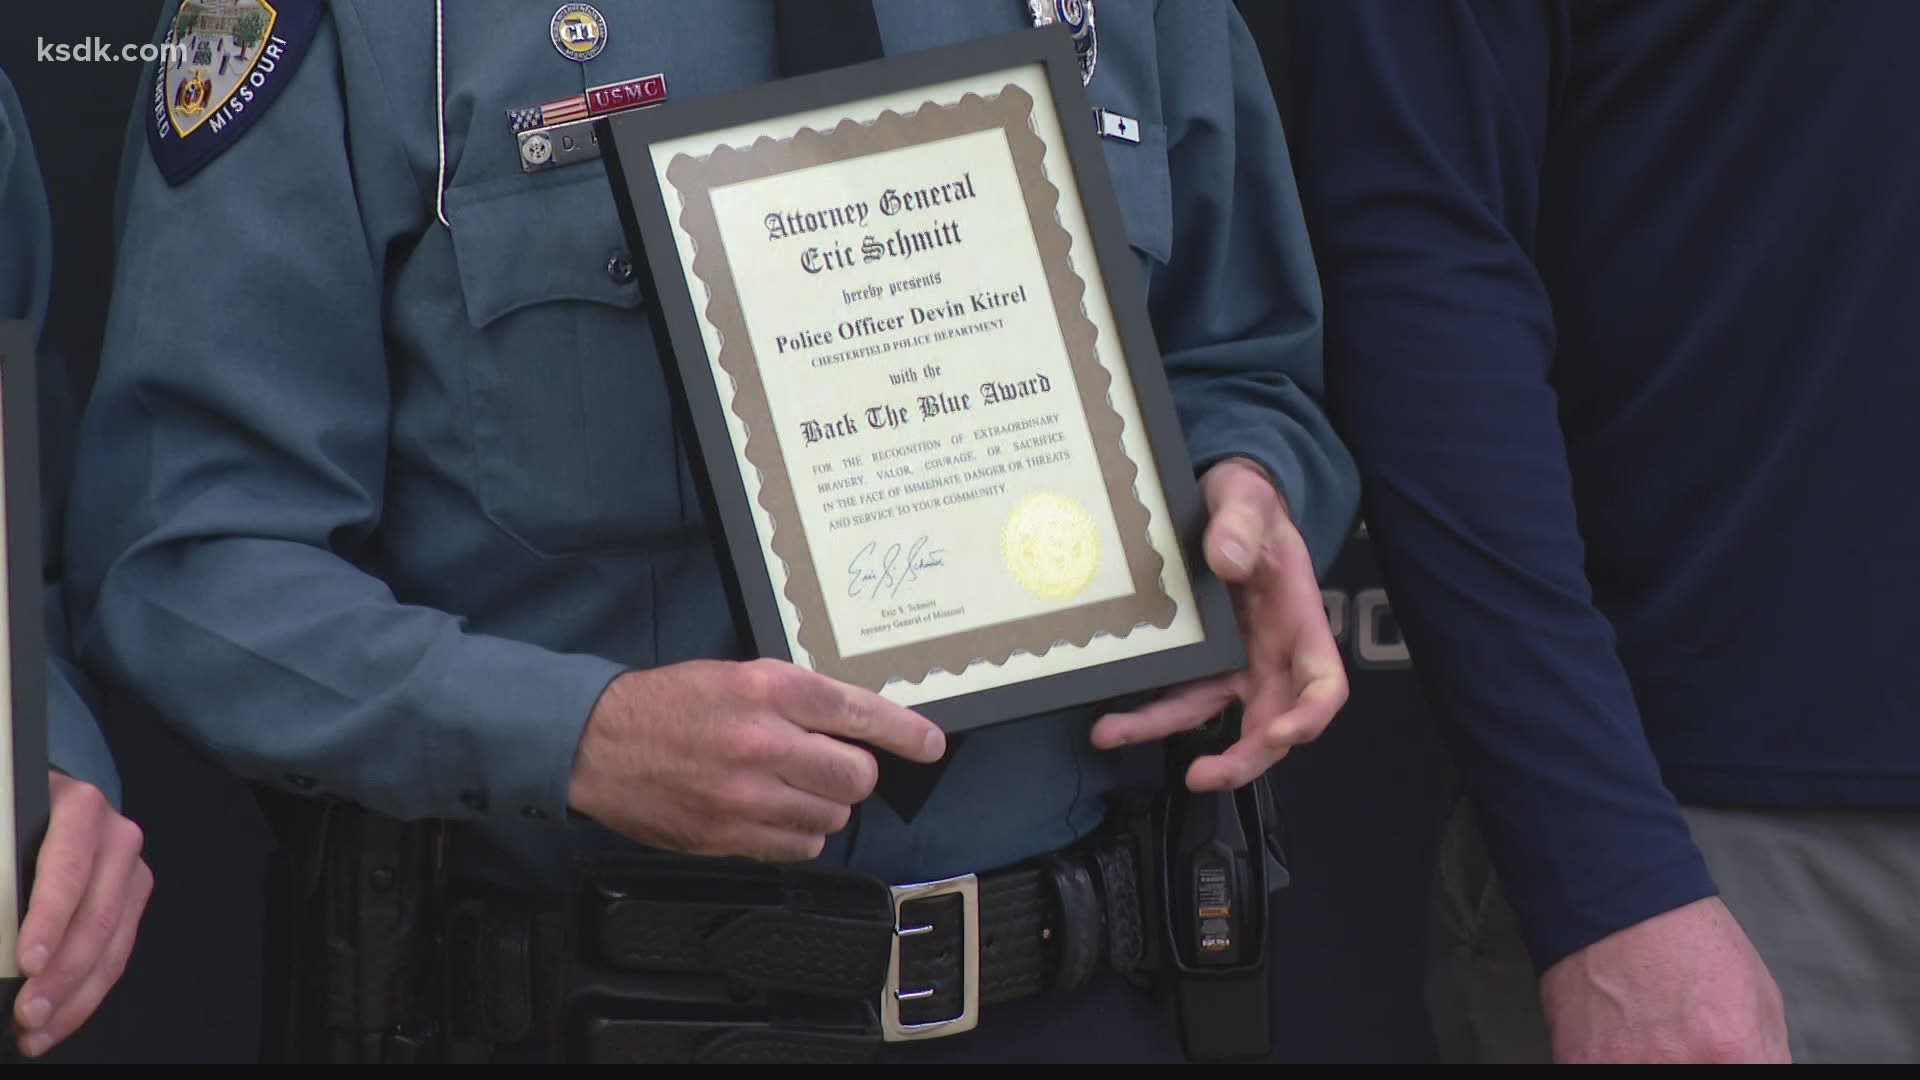 Missouri Attorney General Schmitt presented them with the "Back the Blue" award at the Chesterfield City Hall